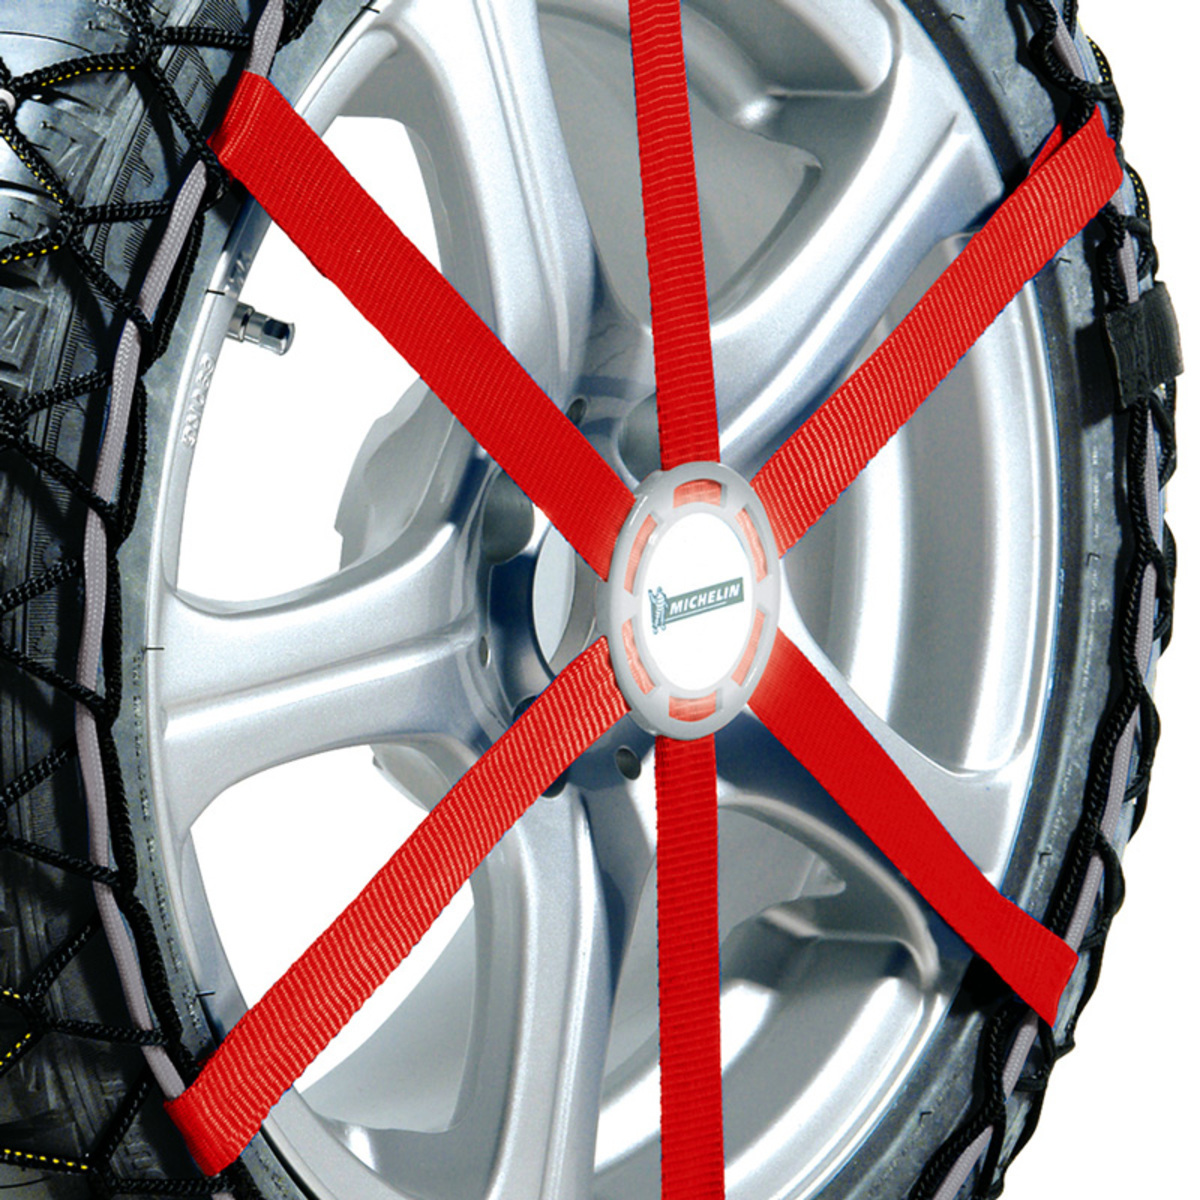 14 Inch Michelin Easy Grip Composite Snow Chains for 2WD Cars with 185/60/14 Sized Tyres